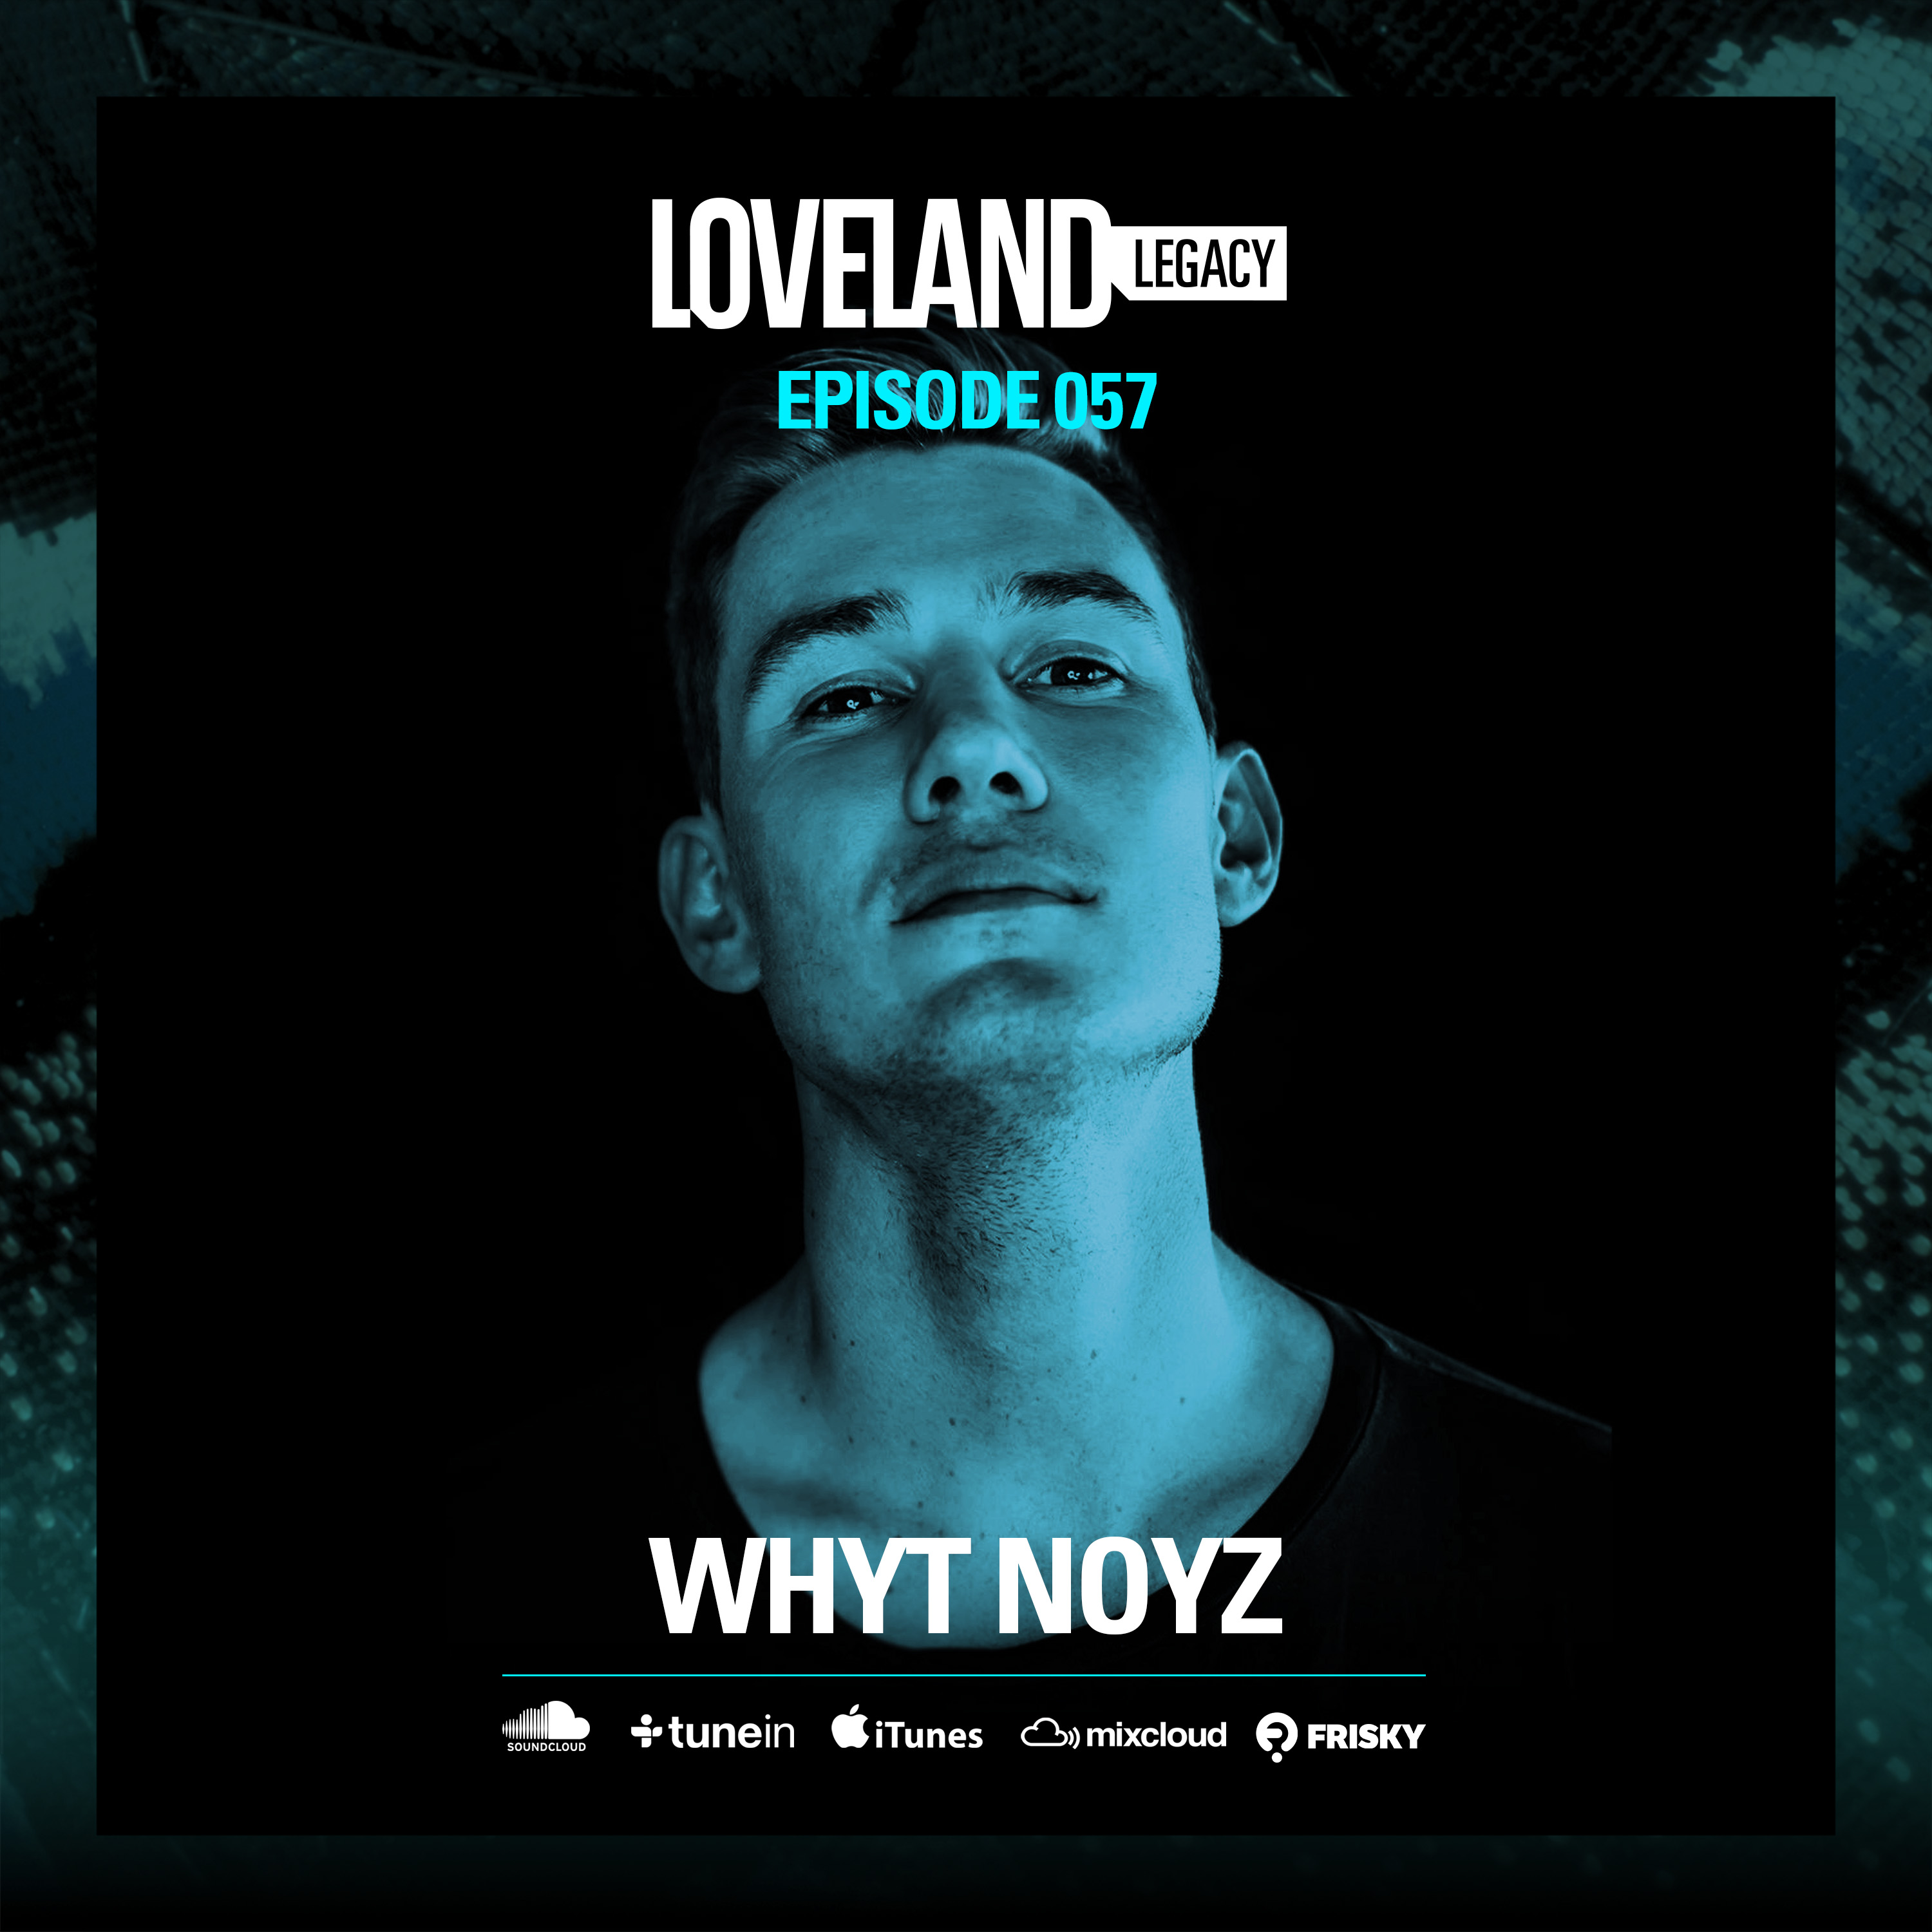 For this week's Loveland Legacy we warmly welcome Whyt Noyz. Last October he performed an astonishing dj-set in our most cozy area during Enter presents Experiences at Loveland ADE: The Basement . Please enjoy mr. Whyt Noyz. See you at 12/08 Loveland Festival | goo.gl/0JuoRm